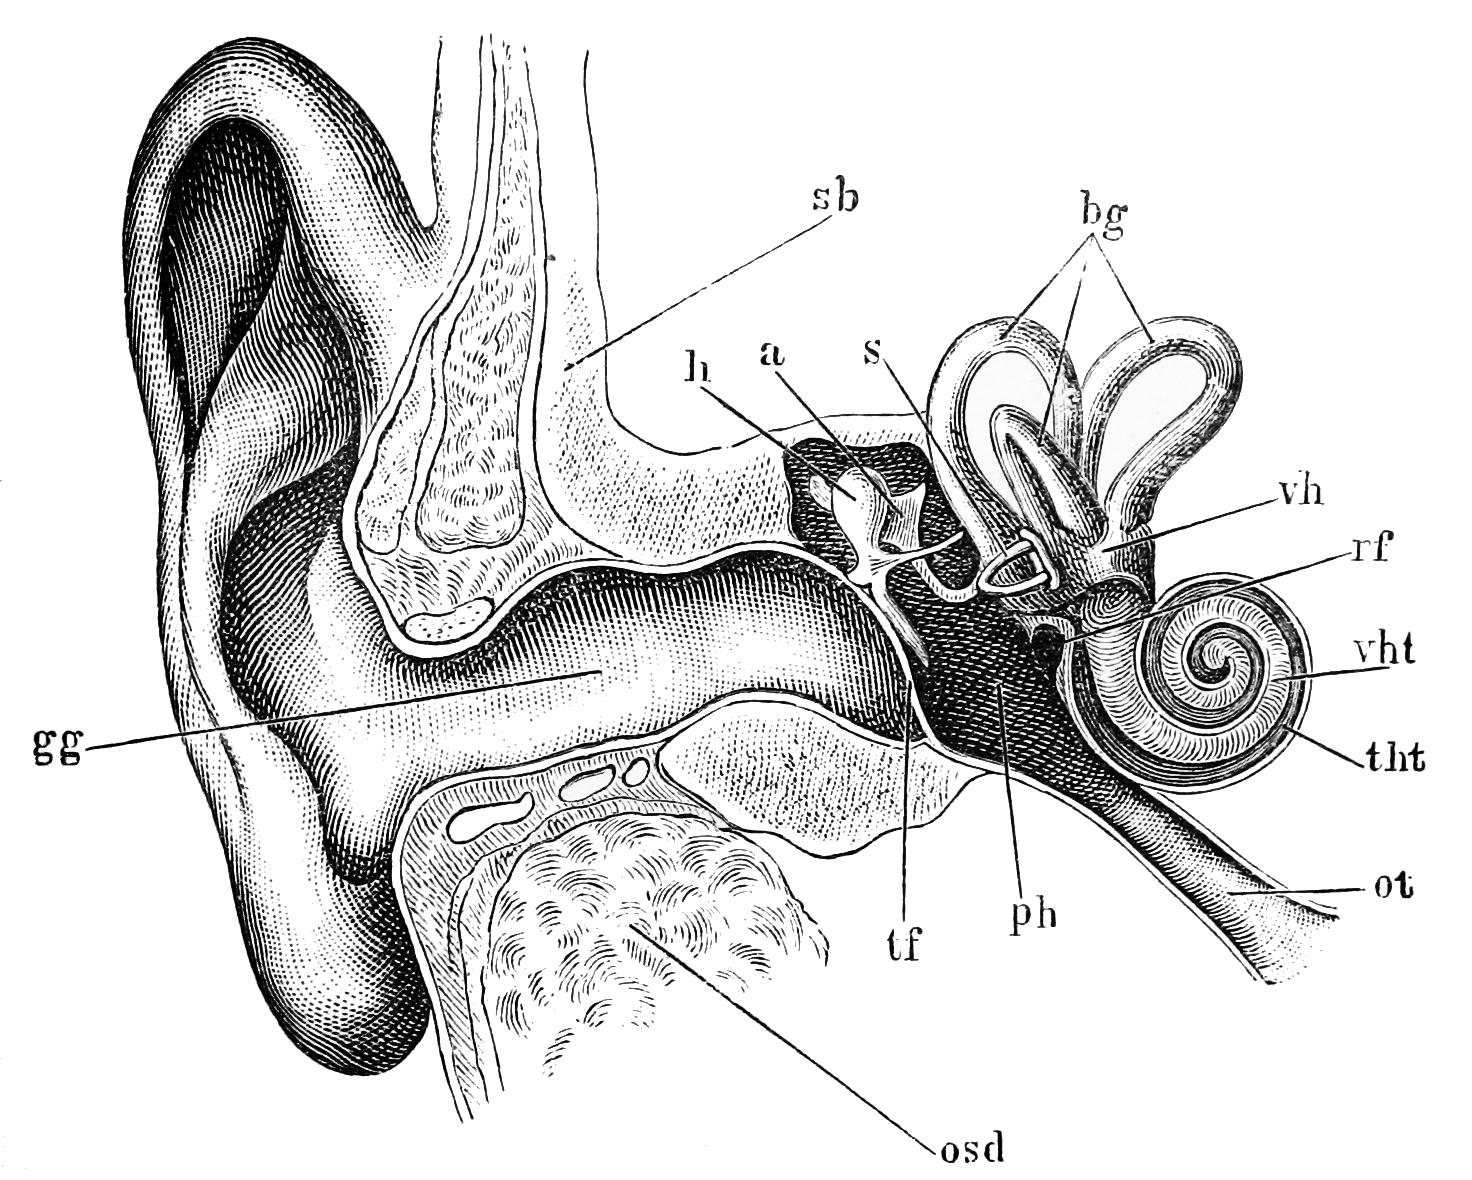 image of ear from wikipedia